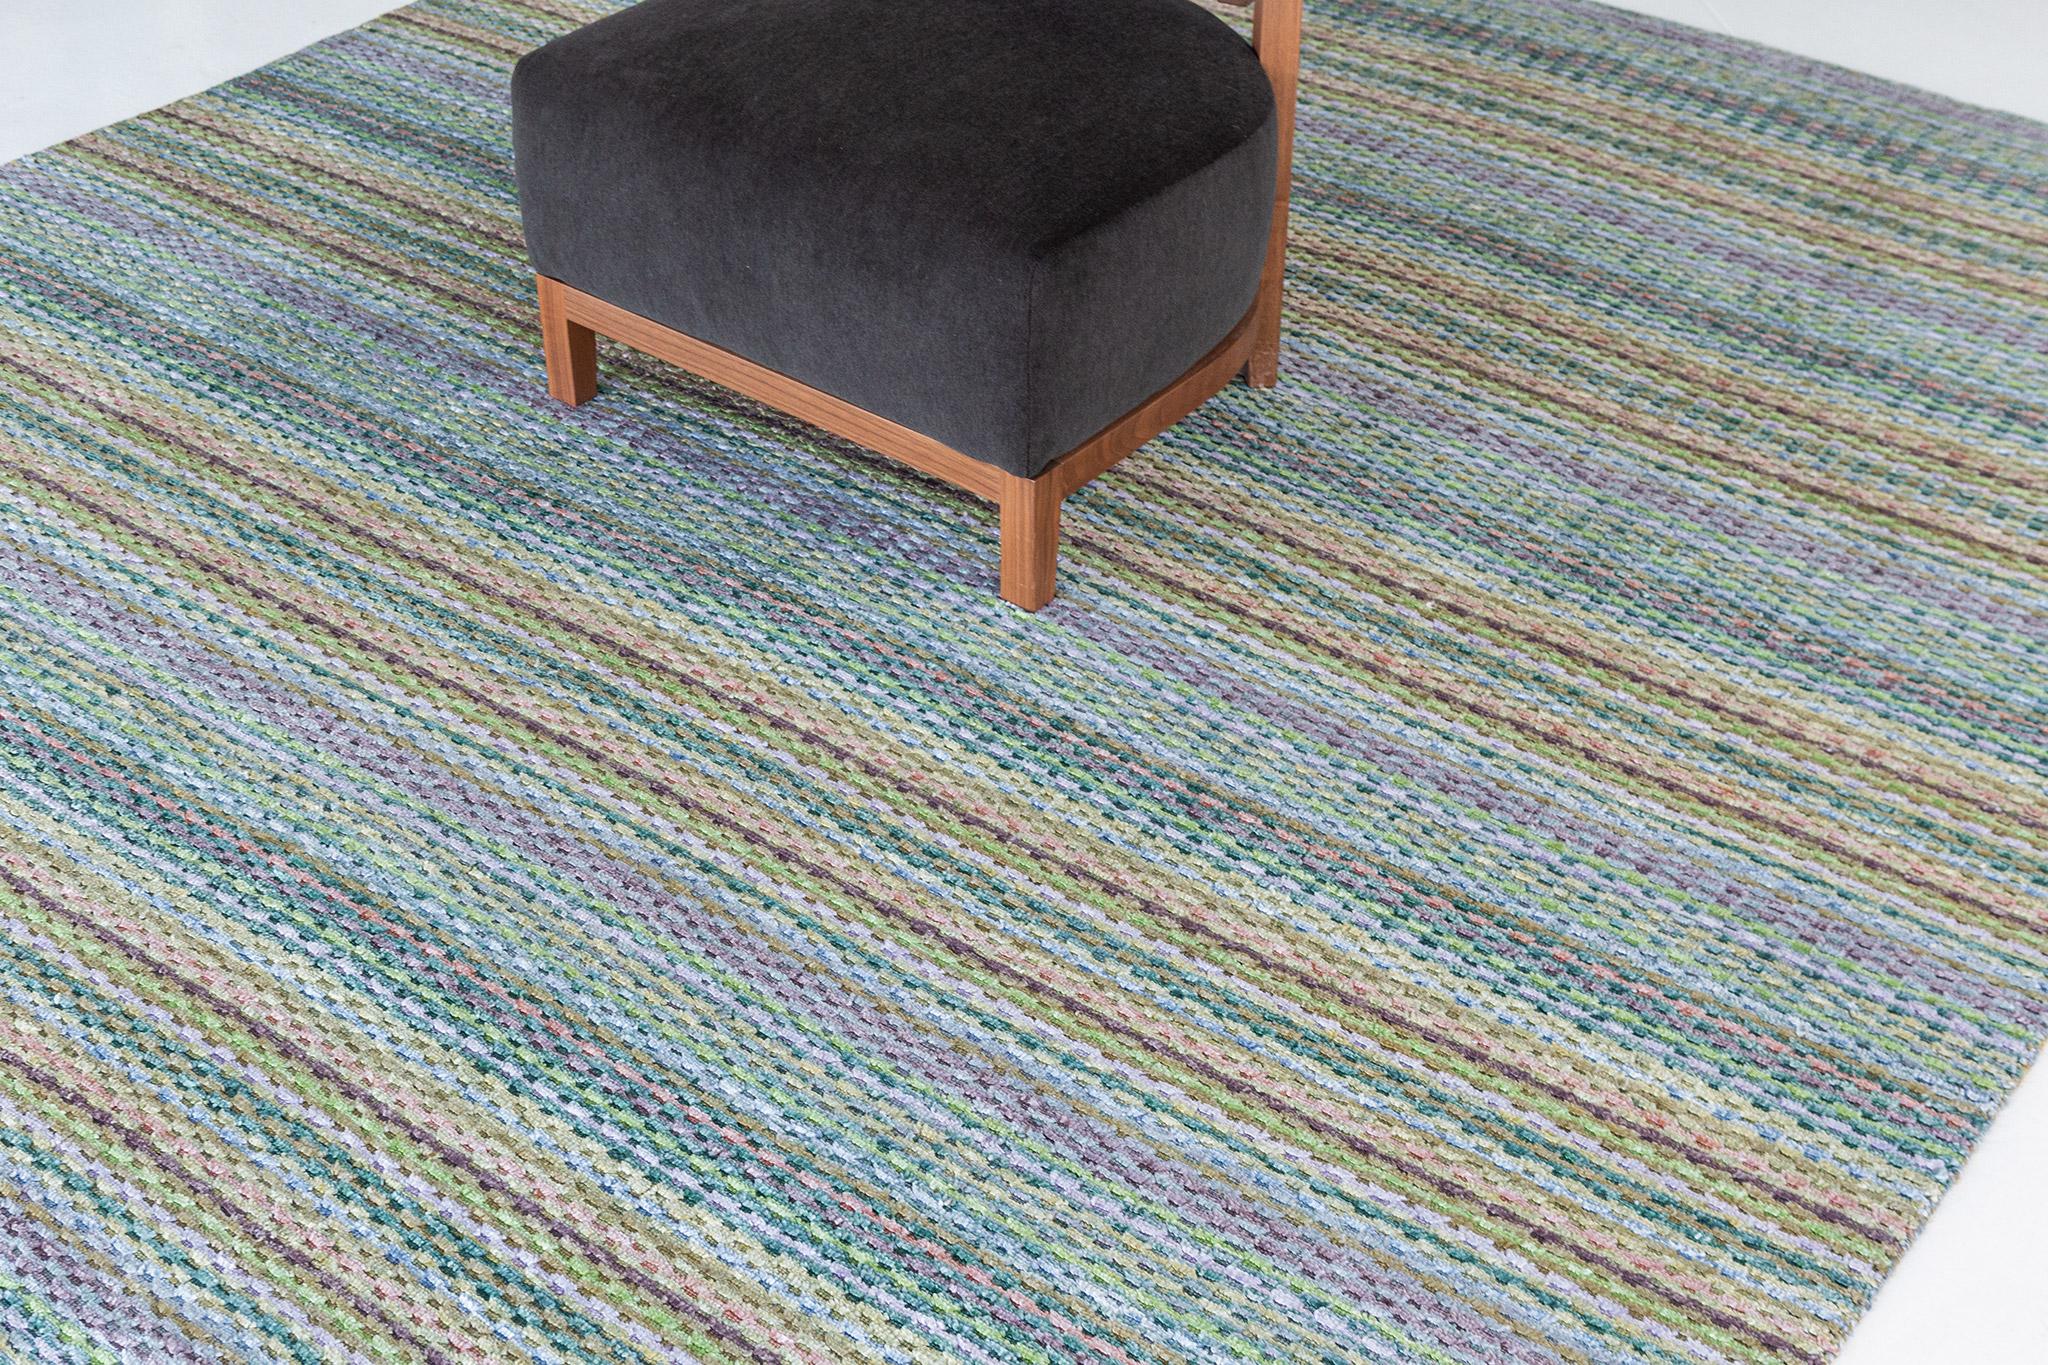 A fascinating modern hand loom rug in our Luca Collection. The delicate ribbed style rug in vibrant tones of green and yellow give it a sophisticated and festive feel. Repeating pile detailing also brings a bold and noteworthy uniqueness to this